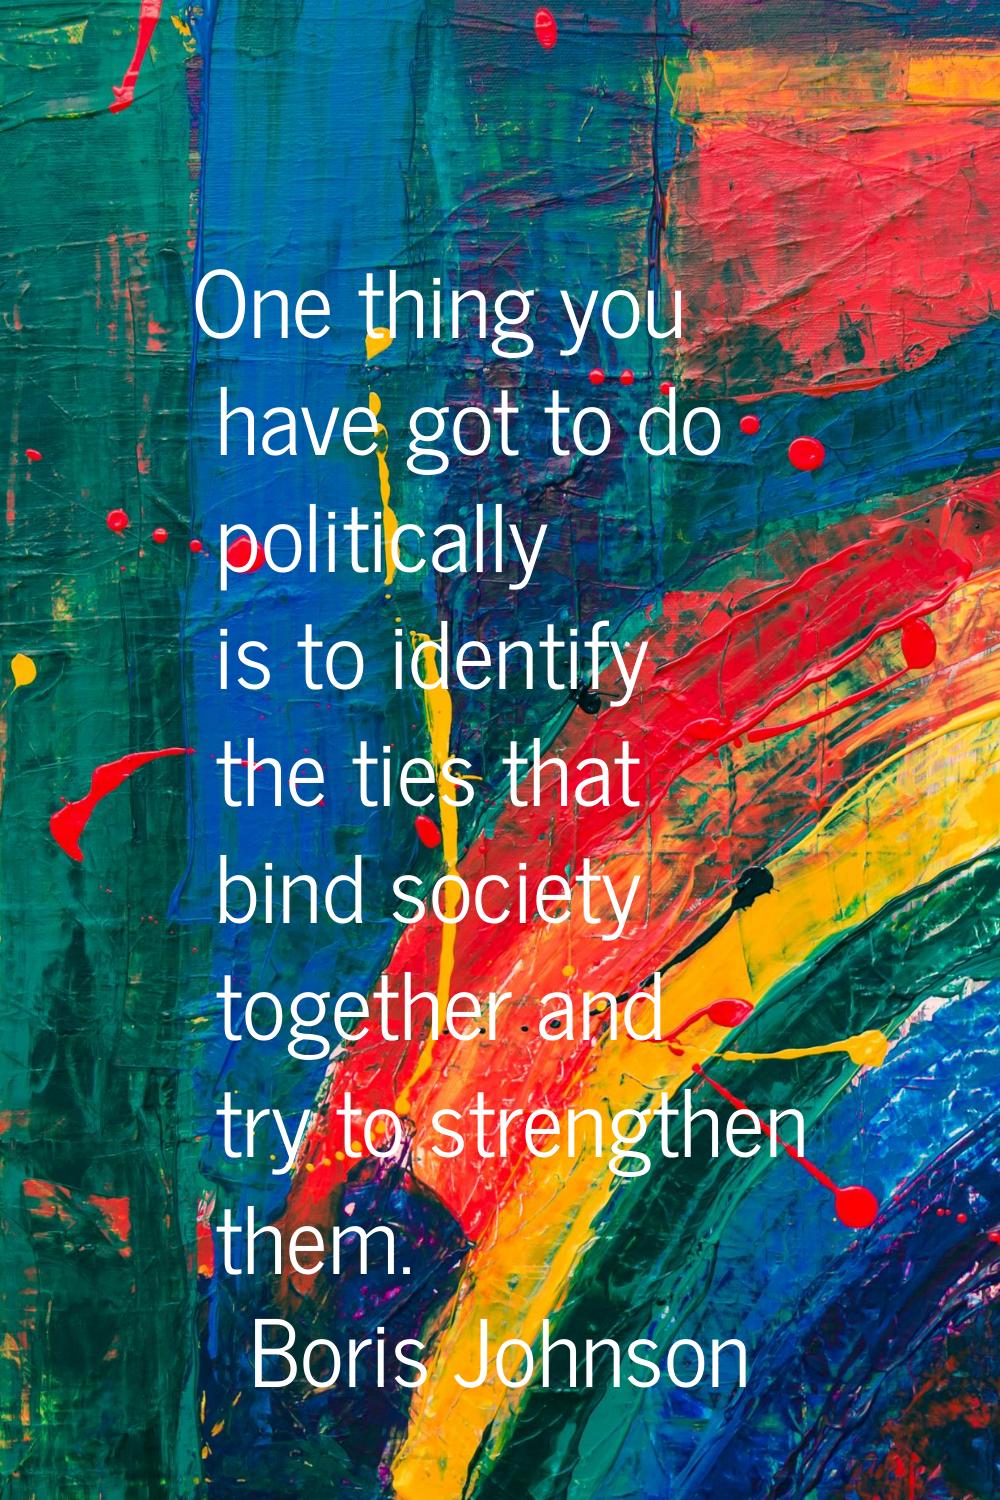 One thing you have got to do politically is to identify the ties that bind society together and try